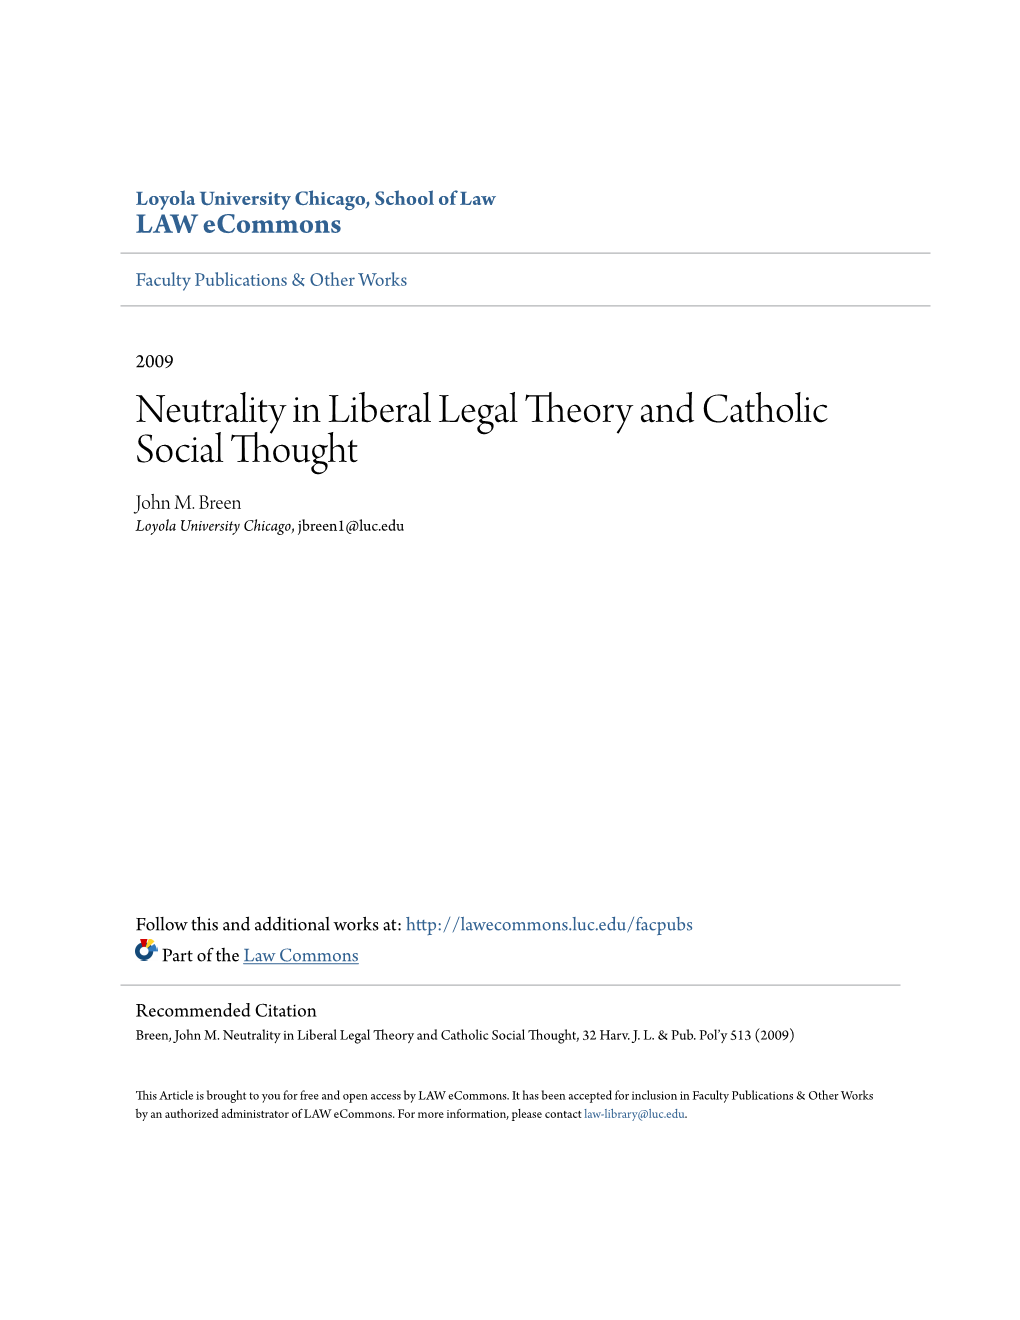 Neutrality in Liberal Legal Theory and Catholic Social Thought John M